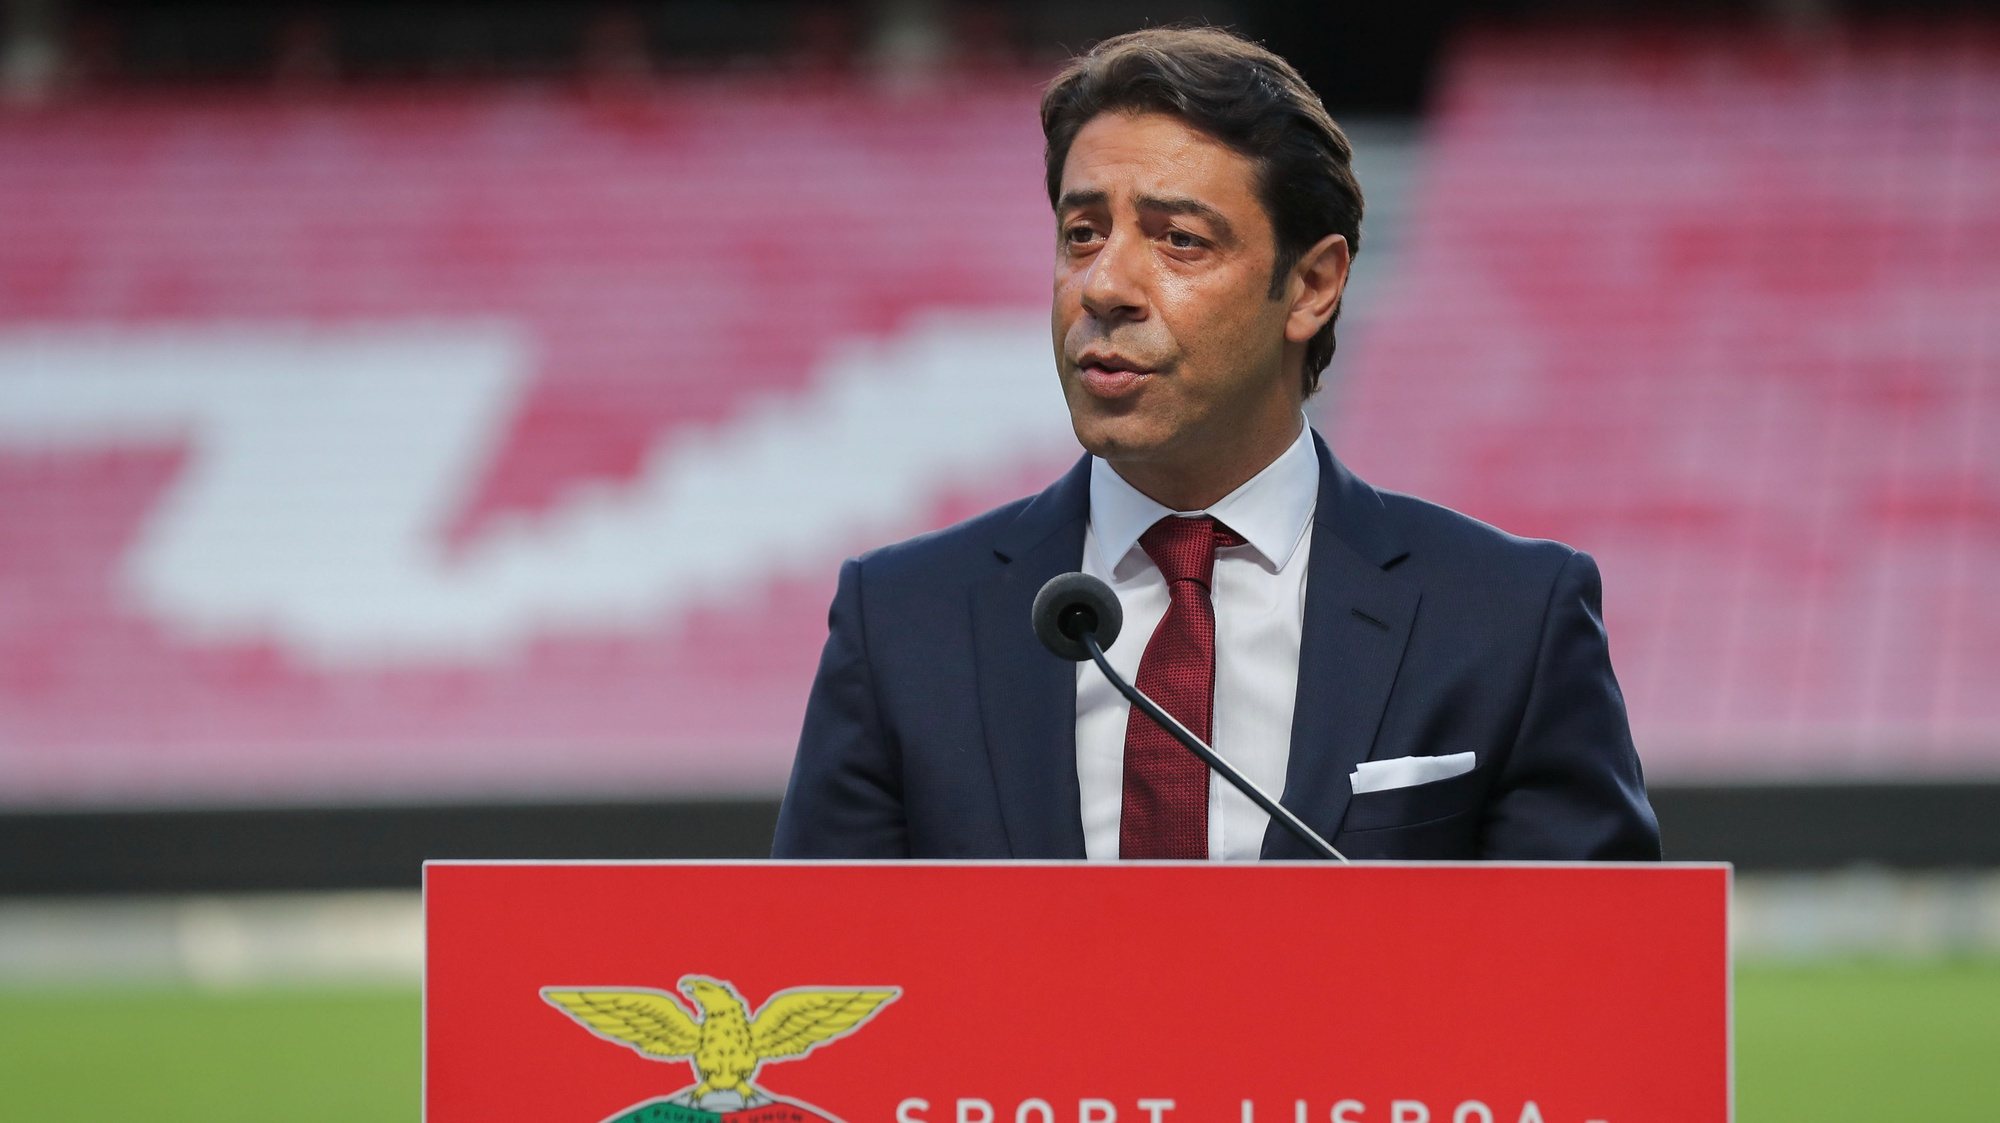 Former player Rui Costa addresses to the press after being appointed by Portuguese football club Benfica  as its new president  to replace Luis Filipe Vieira, who suspended his duties after he was detained as part of an investigation into alleged tax fraud and money laundering, Lisbon 09 July 2021.  MIGUEL A. LOPES/LUSA